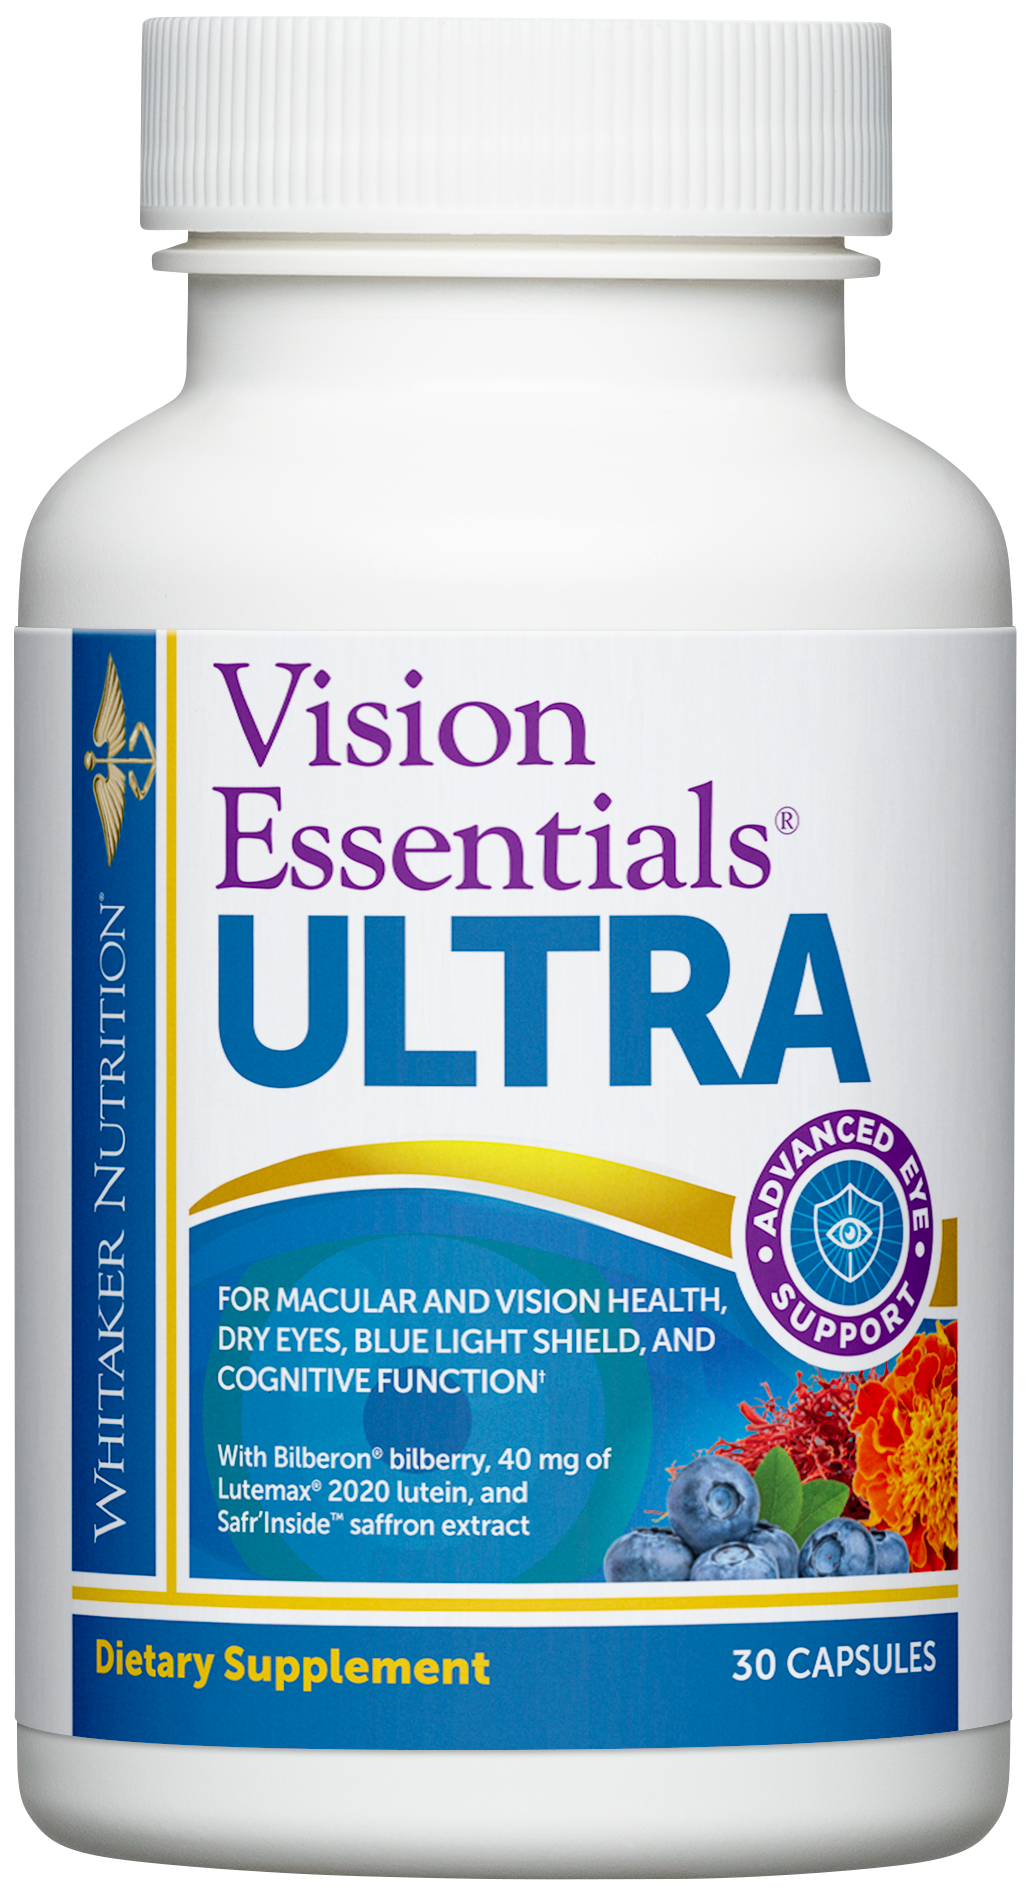 New Vision Essentials ULTRA is a comprehensive, vegetarian eye health supplement that delivers powerful benefits in one pill a day.